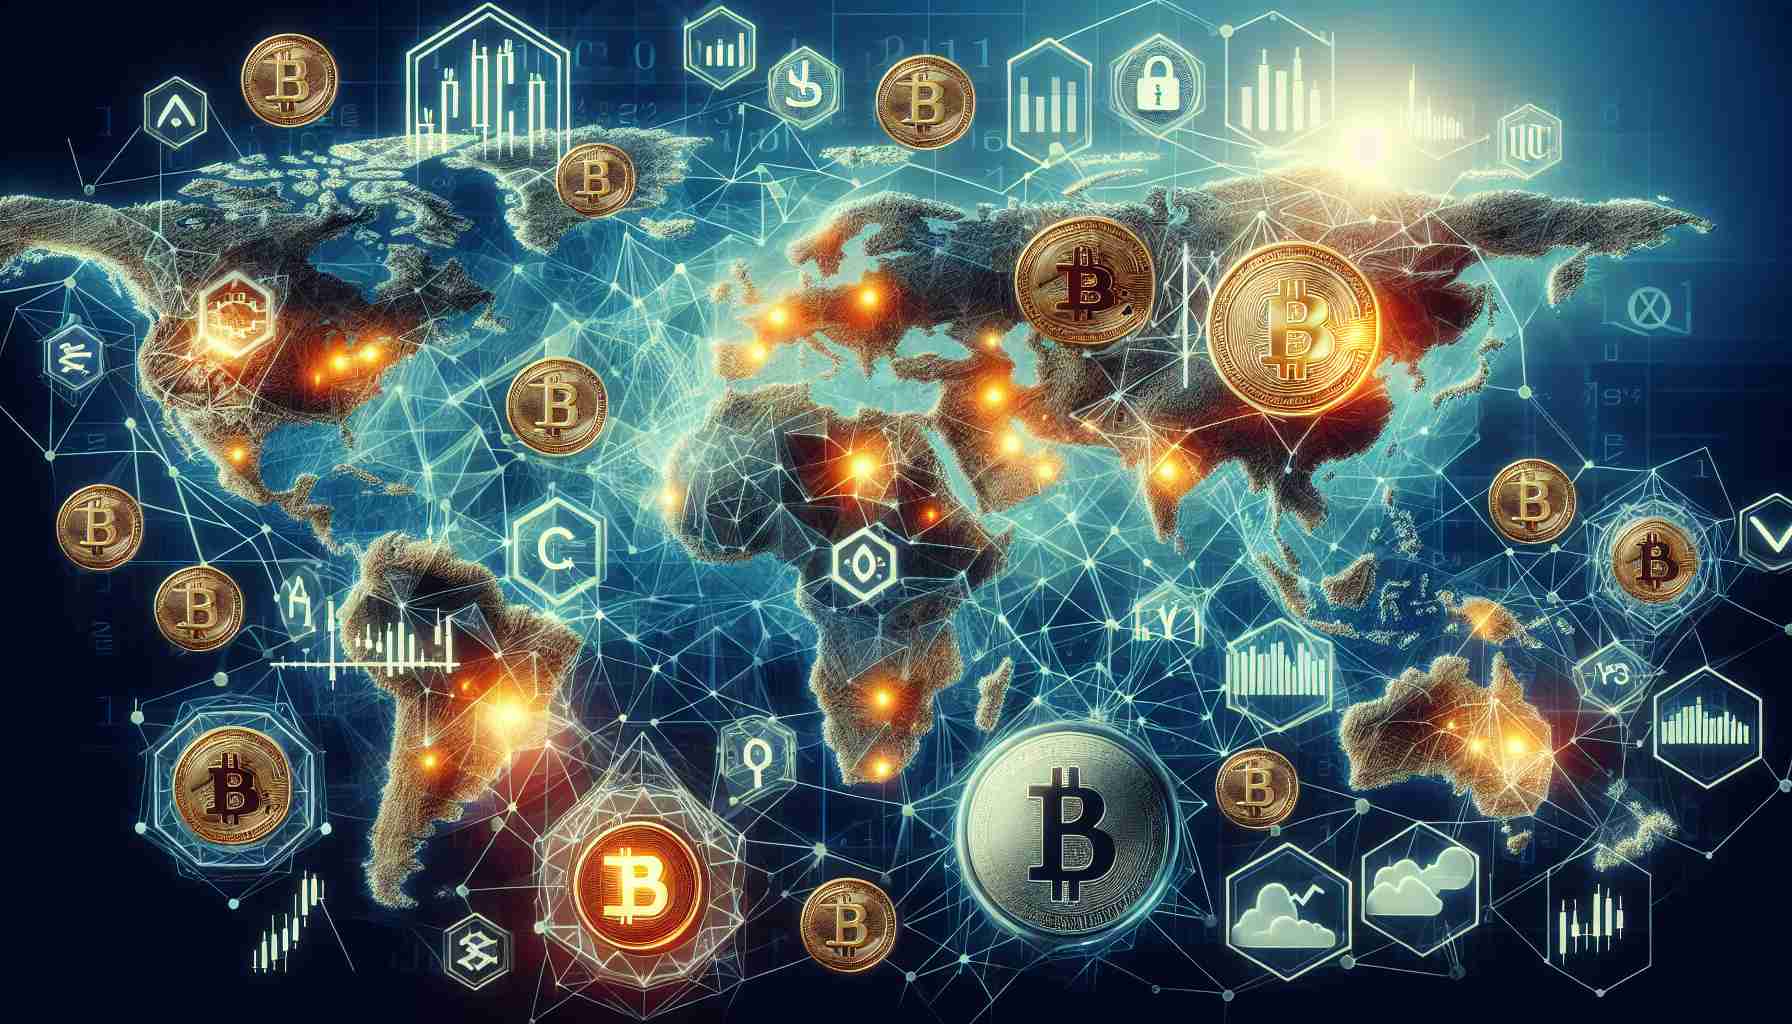 A detailed and realistic high-definition image that visually portrays the concept of how disruptive blockchain technology is innovating global financial markets. This might include symbols or icons associated with blockchain, such as complex encrypted network structures and digital currency tokens, as well as symbols that represent the global financial markets, such as stock market graphs, world maps with key financial centers highlighted, and currency symbols from around the world.